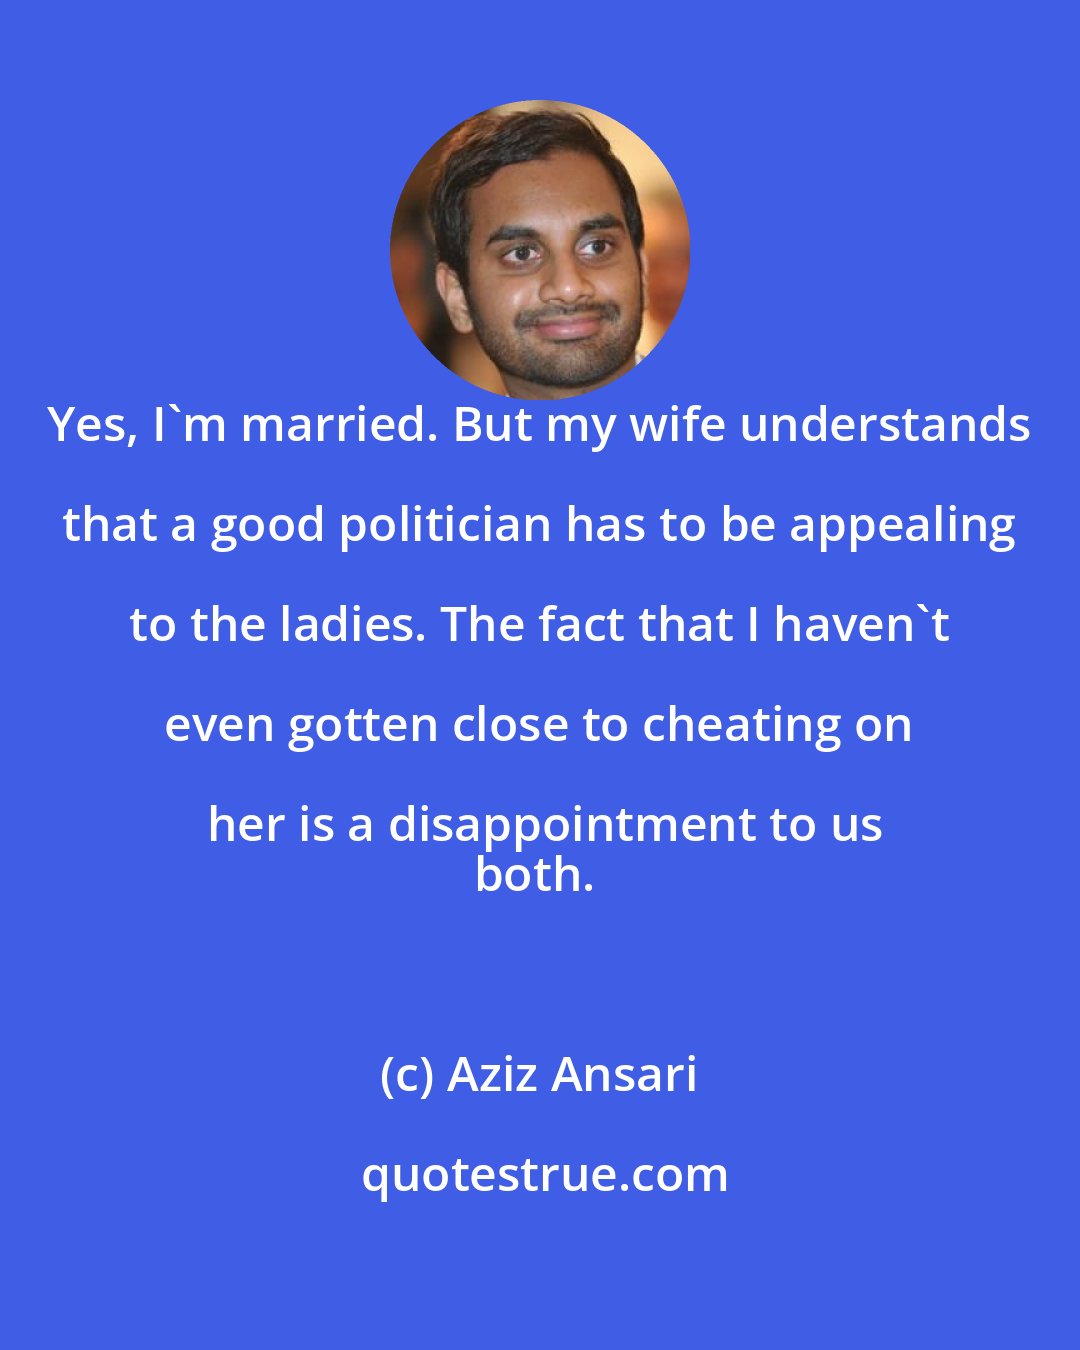 Aziz Ansari: Yes, I'm married. But my wife understands that a good politician has to be appealing to the ladies. The fact that I haven't even gotten close to cheating on her is a disappointment to us
both.